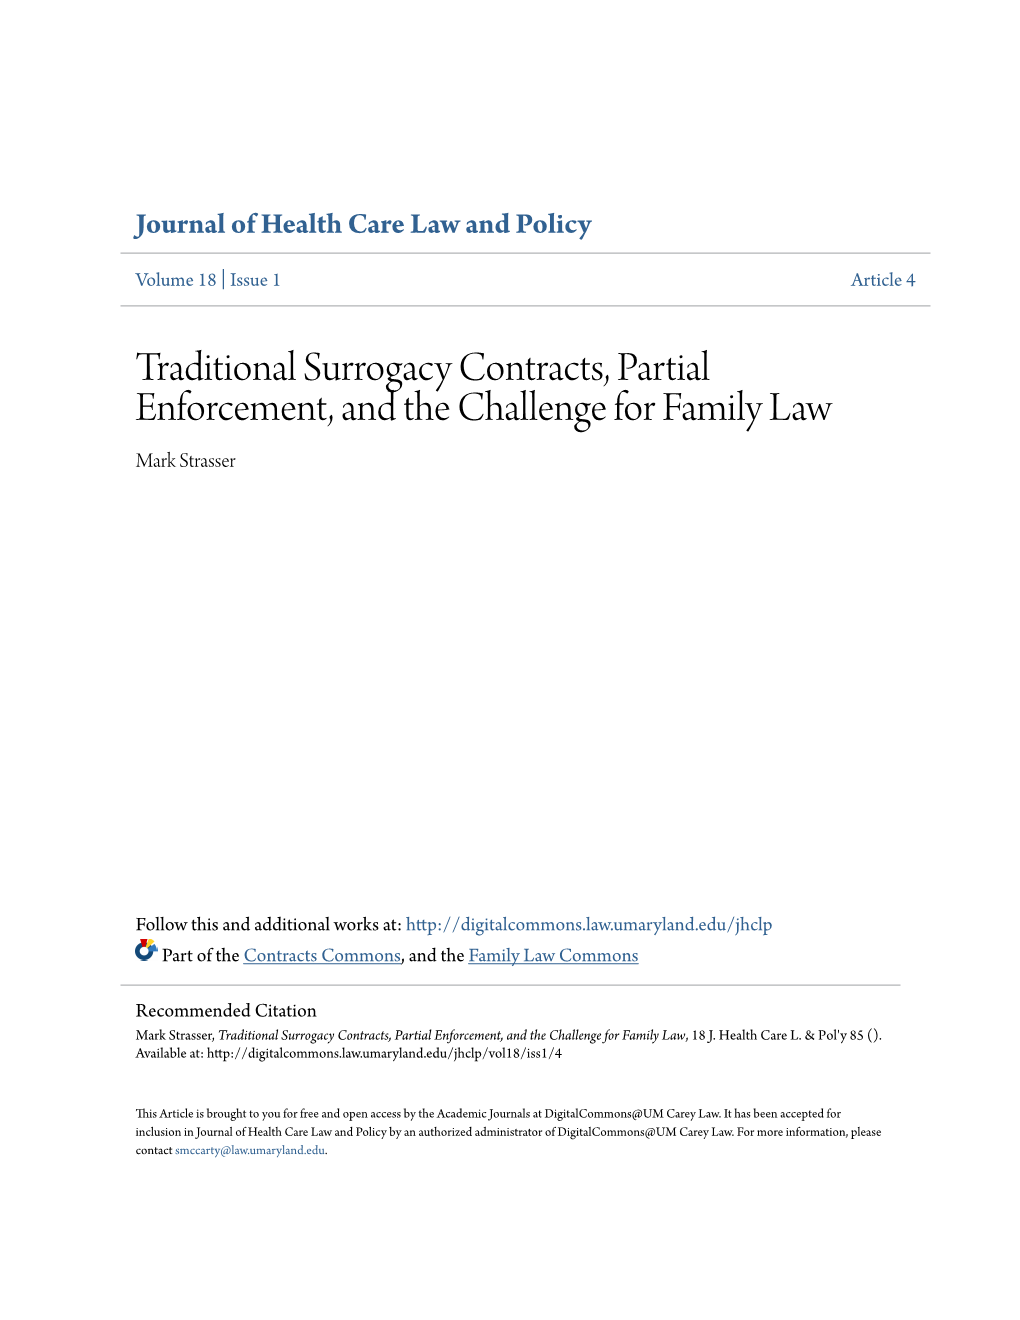 Traditional Surrogacy Contracts, Partial Enforcement, and the Challenge for Family Law Mark Strasser